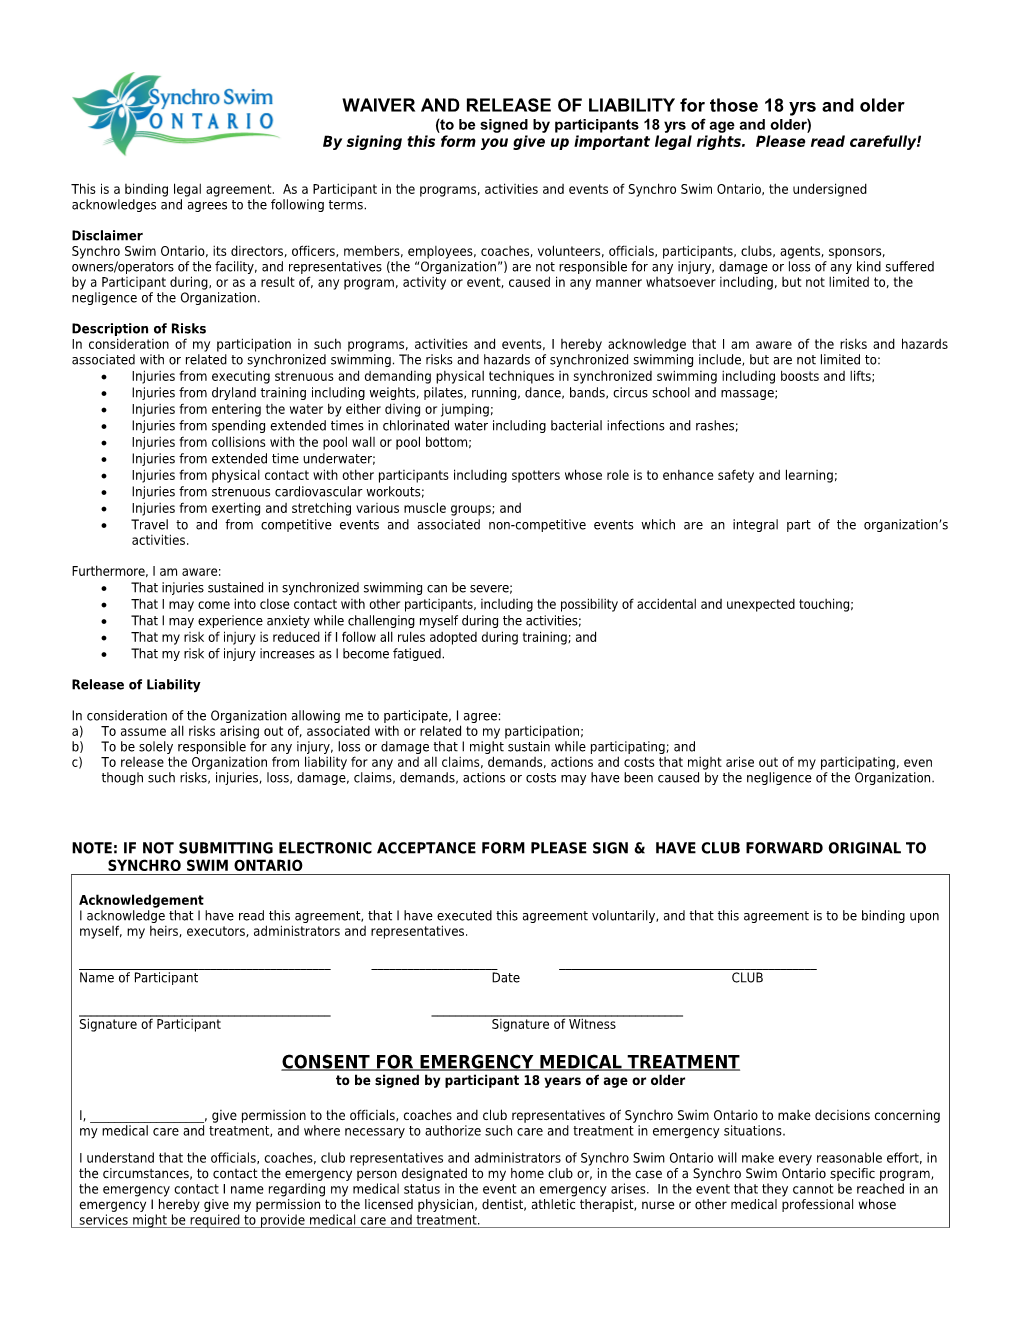 WAIVER and RELEASE of LIABILITY for Those 18 Yrs and Older